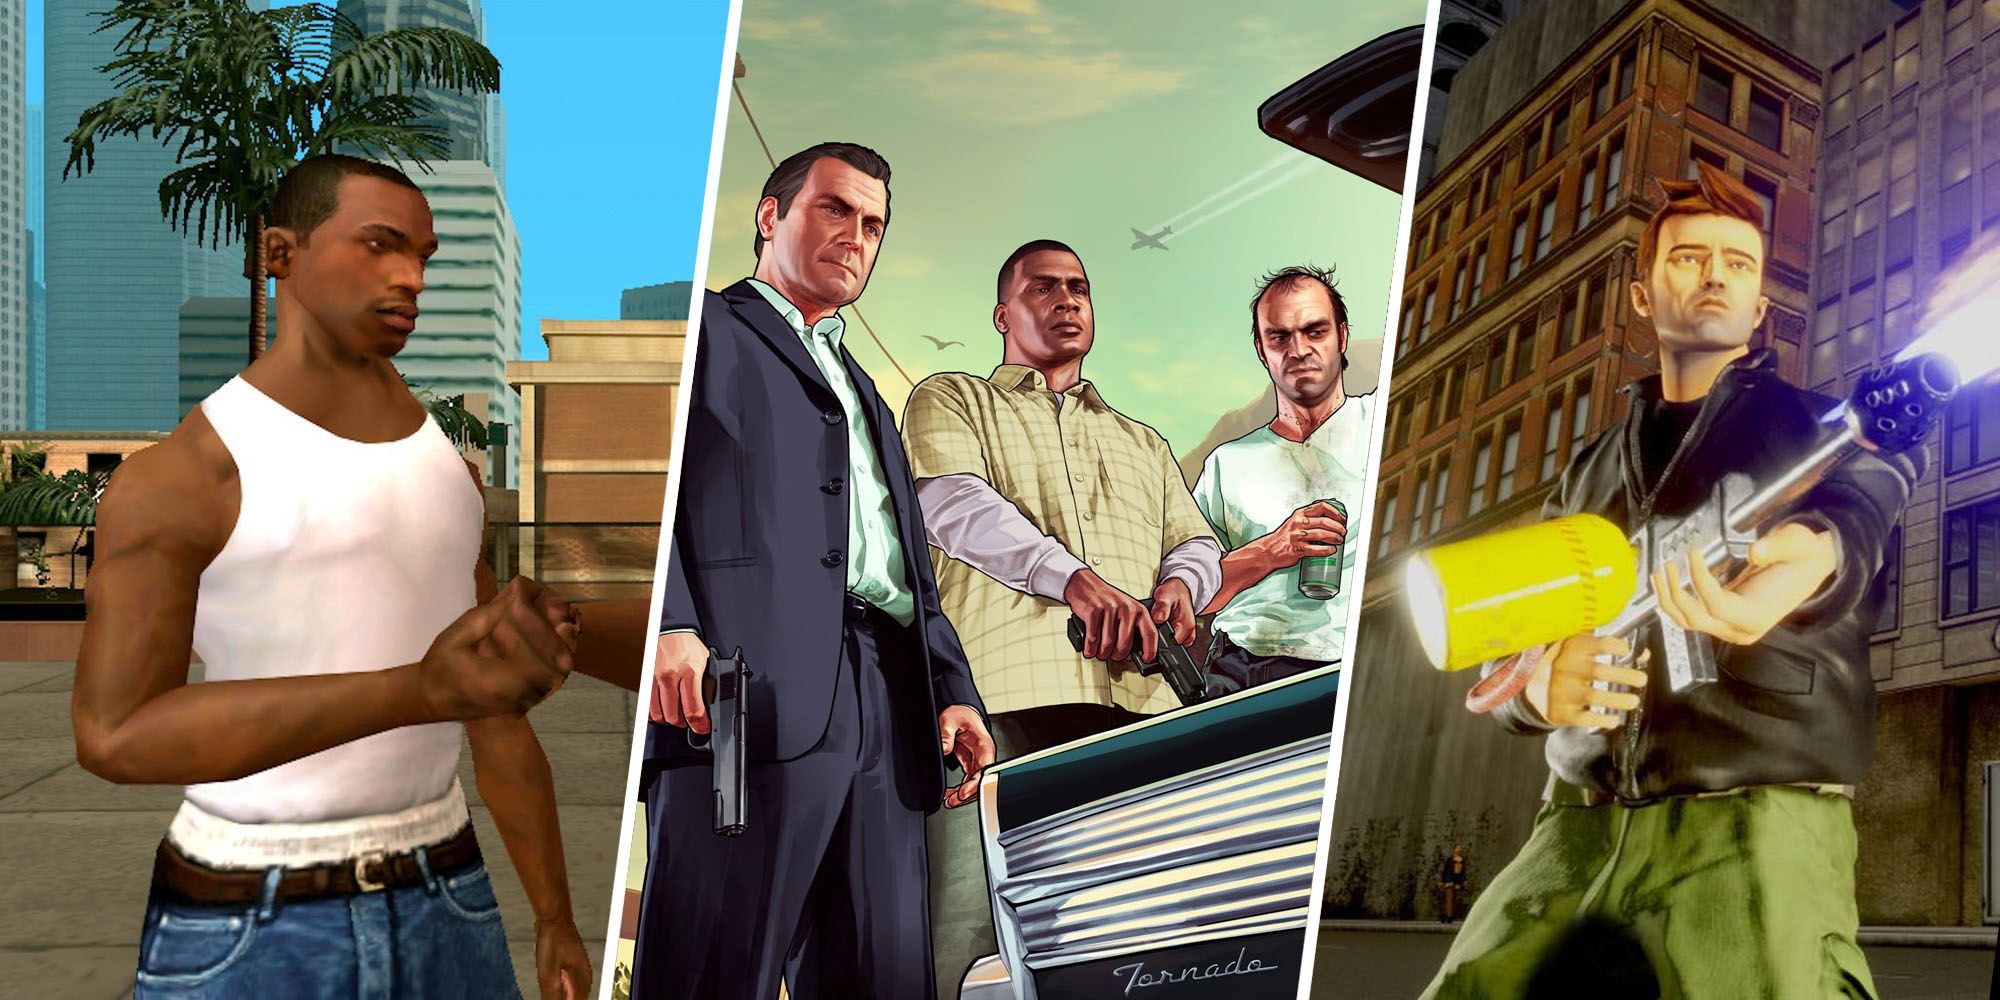 Who is the tallest GTA protagonist?